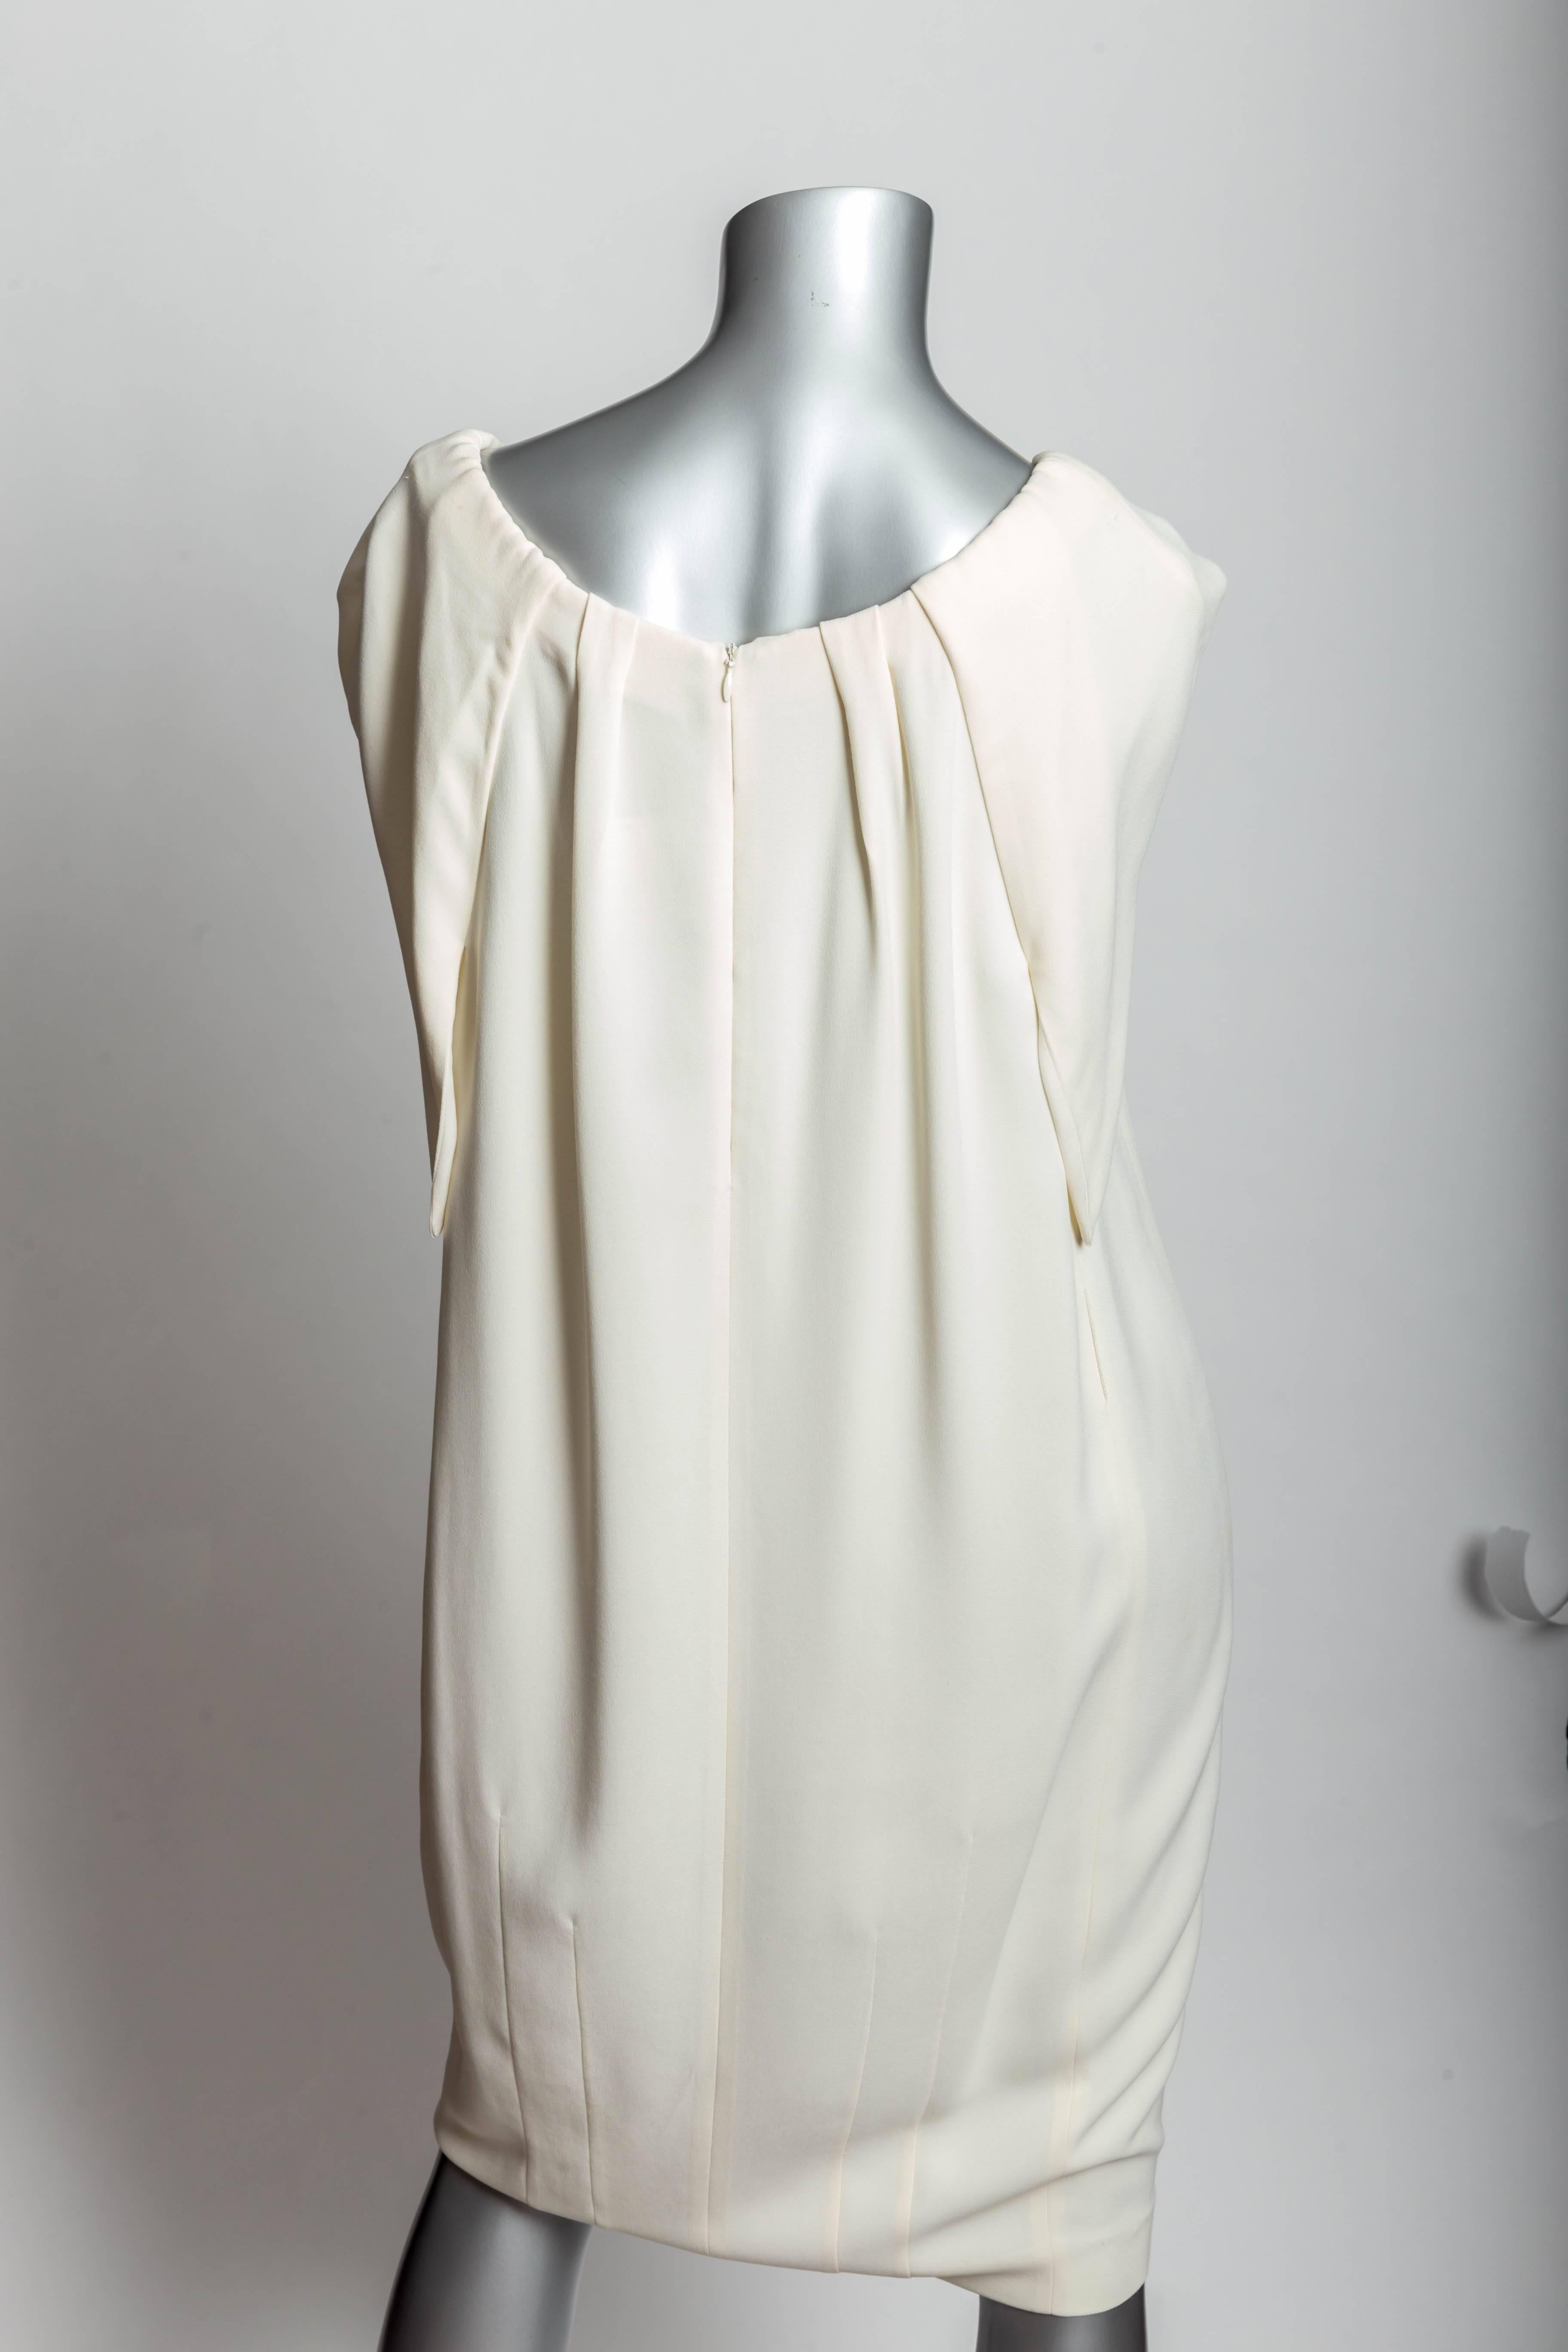 Very pretty Rachel Roy Cold Shoulder Dress - Size 12
Two front faux pockets. Sleeve length above the elbow / 15 inches from shoulder. Fully lined.
Excellent condition